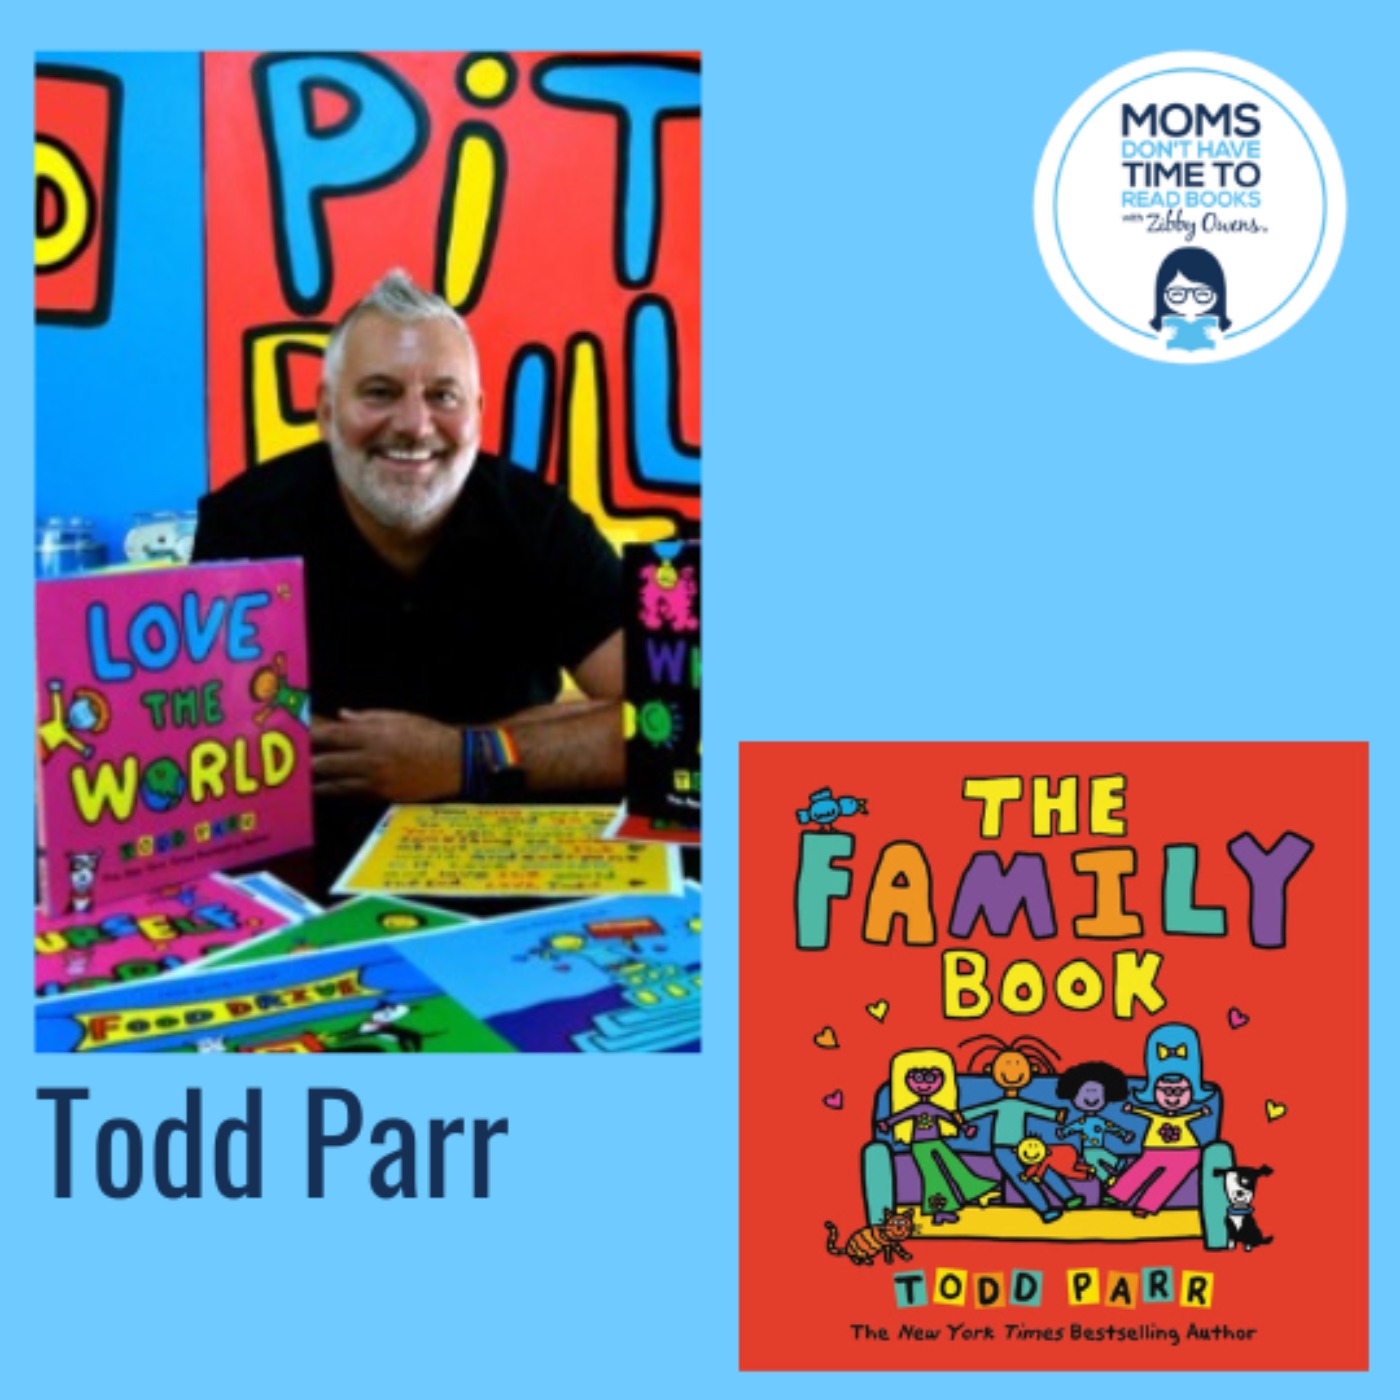 Todd Parr, THE FAMILY BOOK